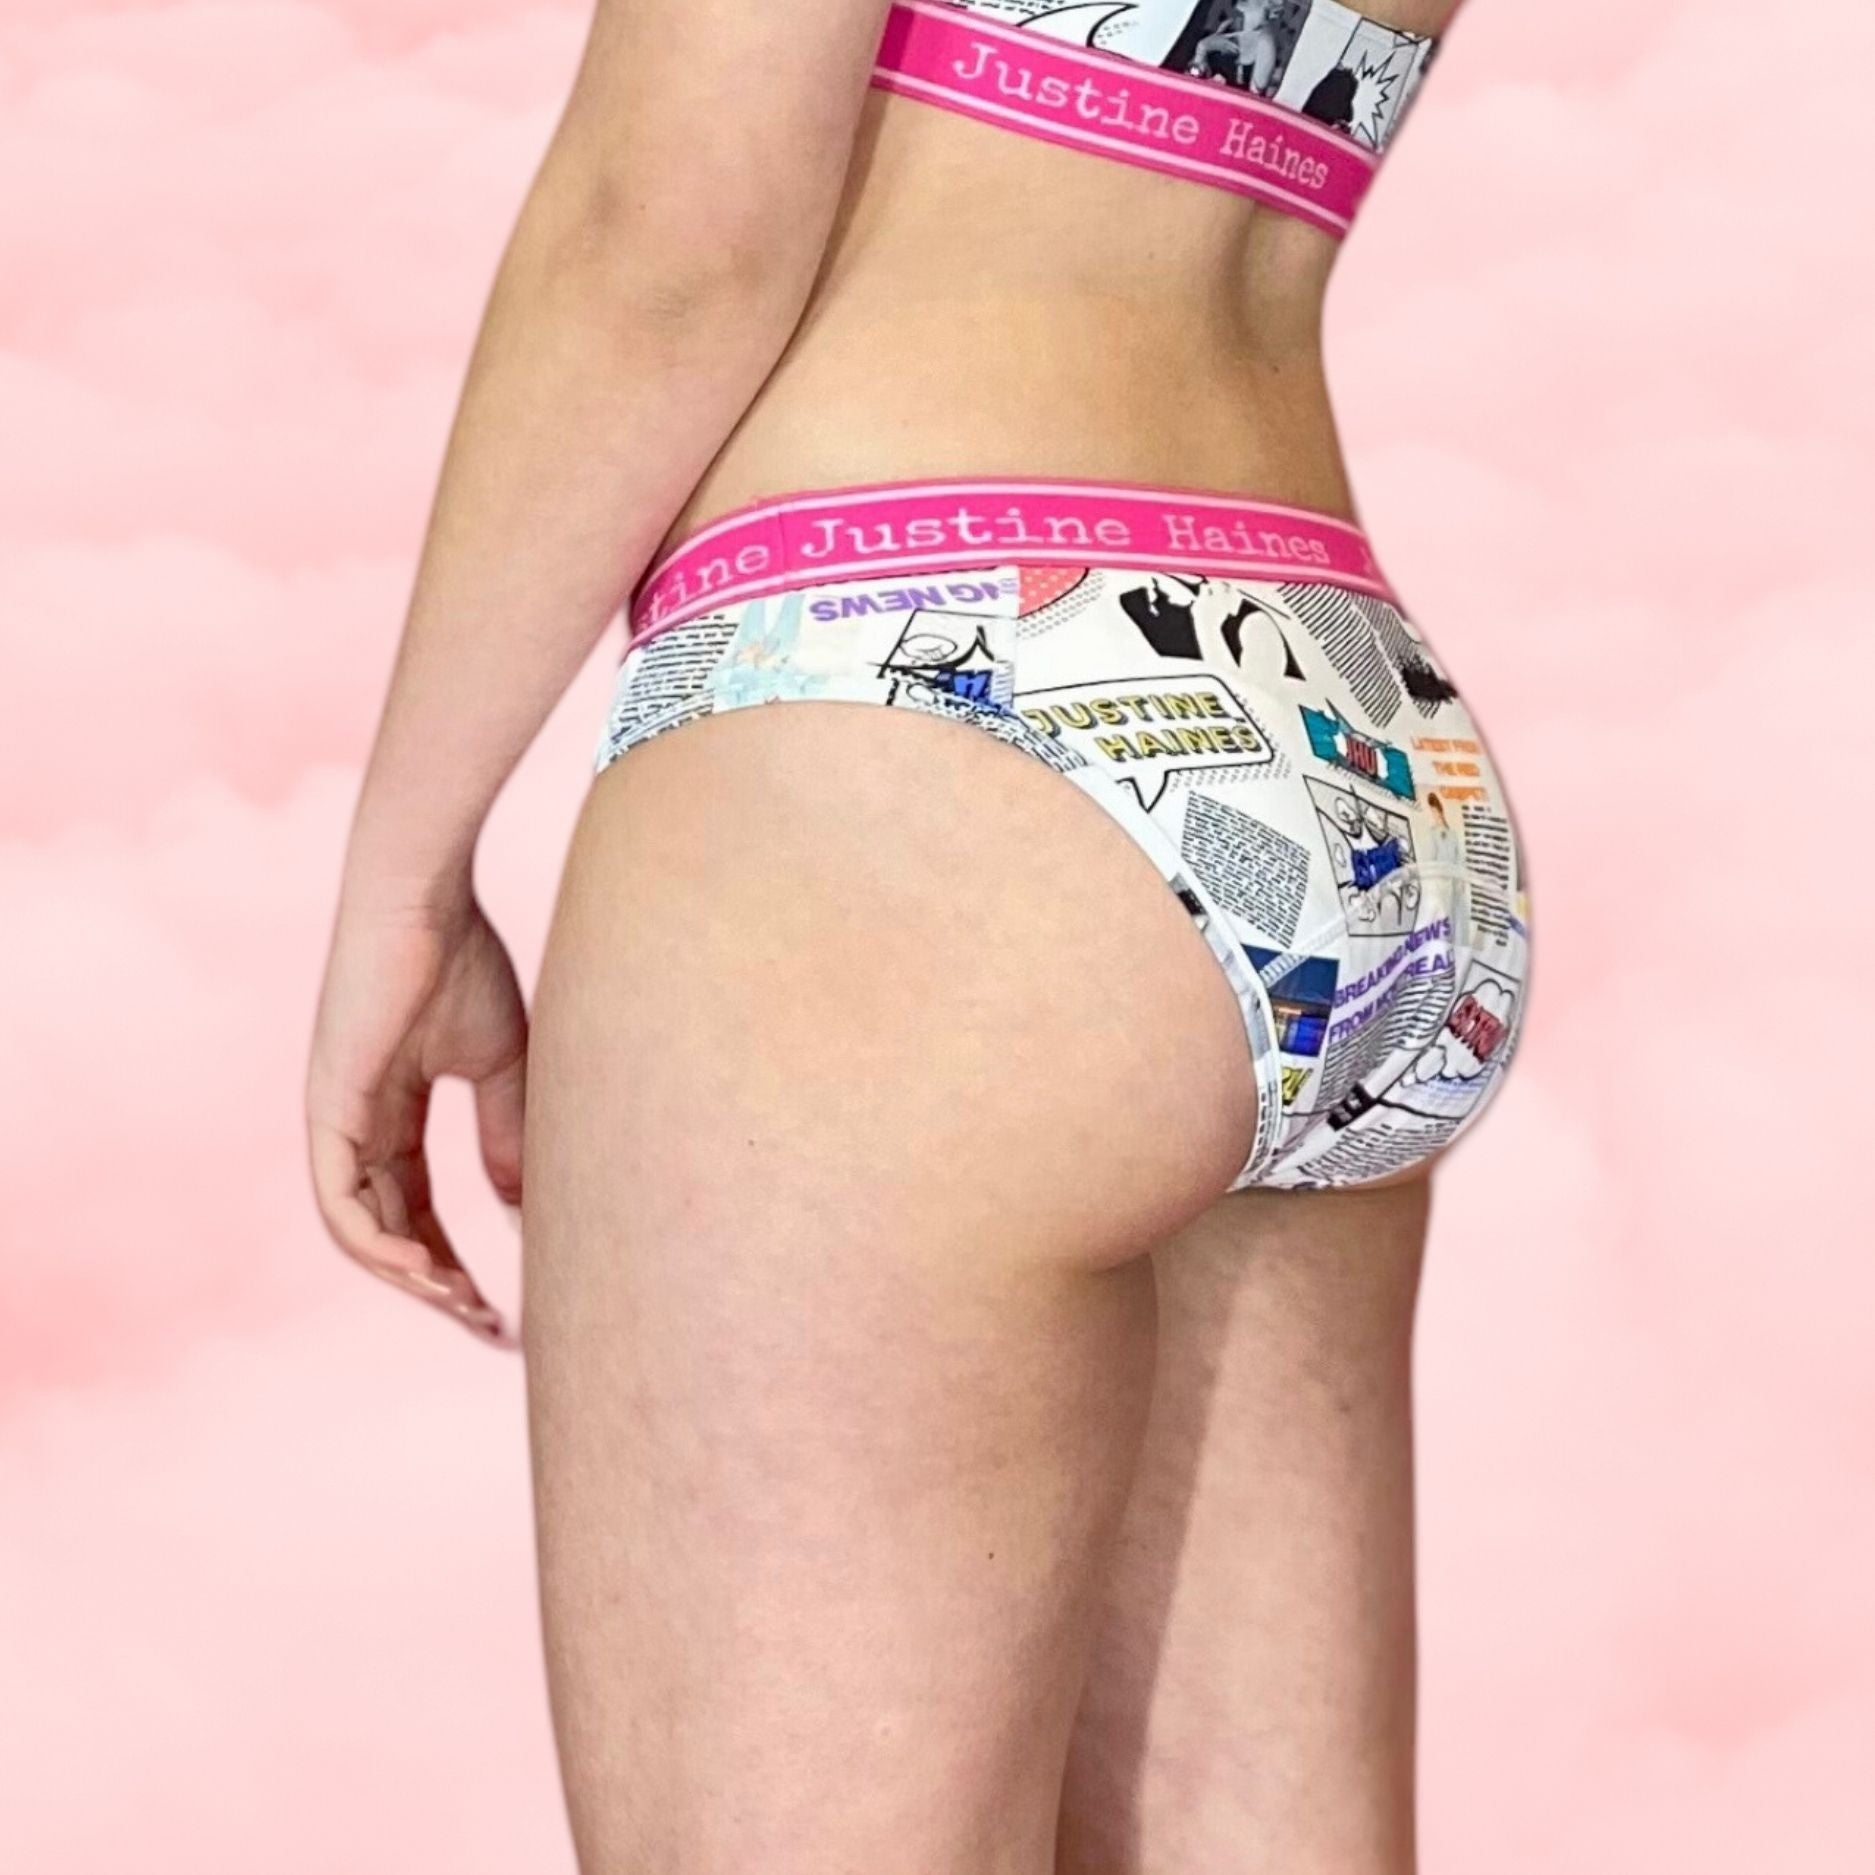 https://www.justinehaines.com/products/adorable-low-rise-fashion-print-period-panties-in-fashion-newspaper-print